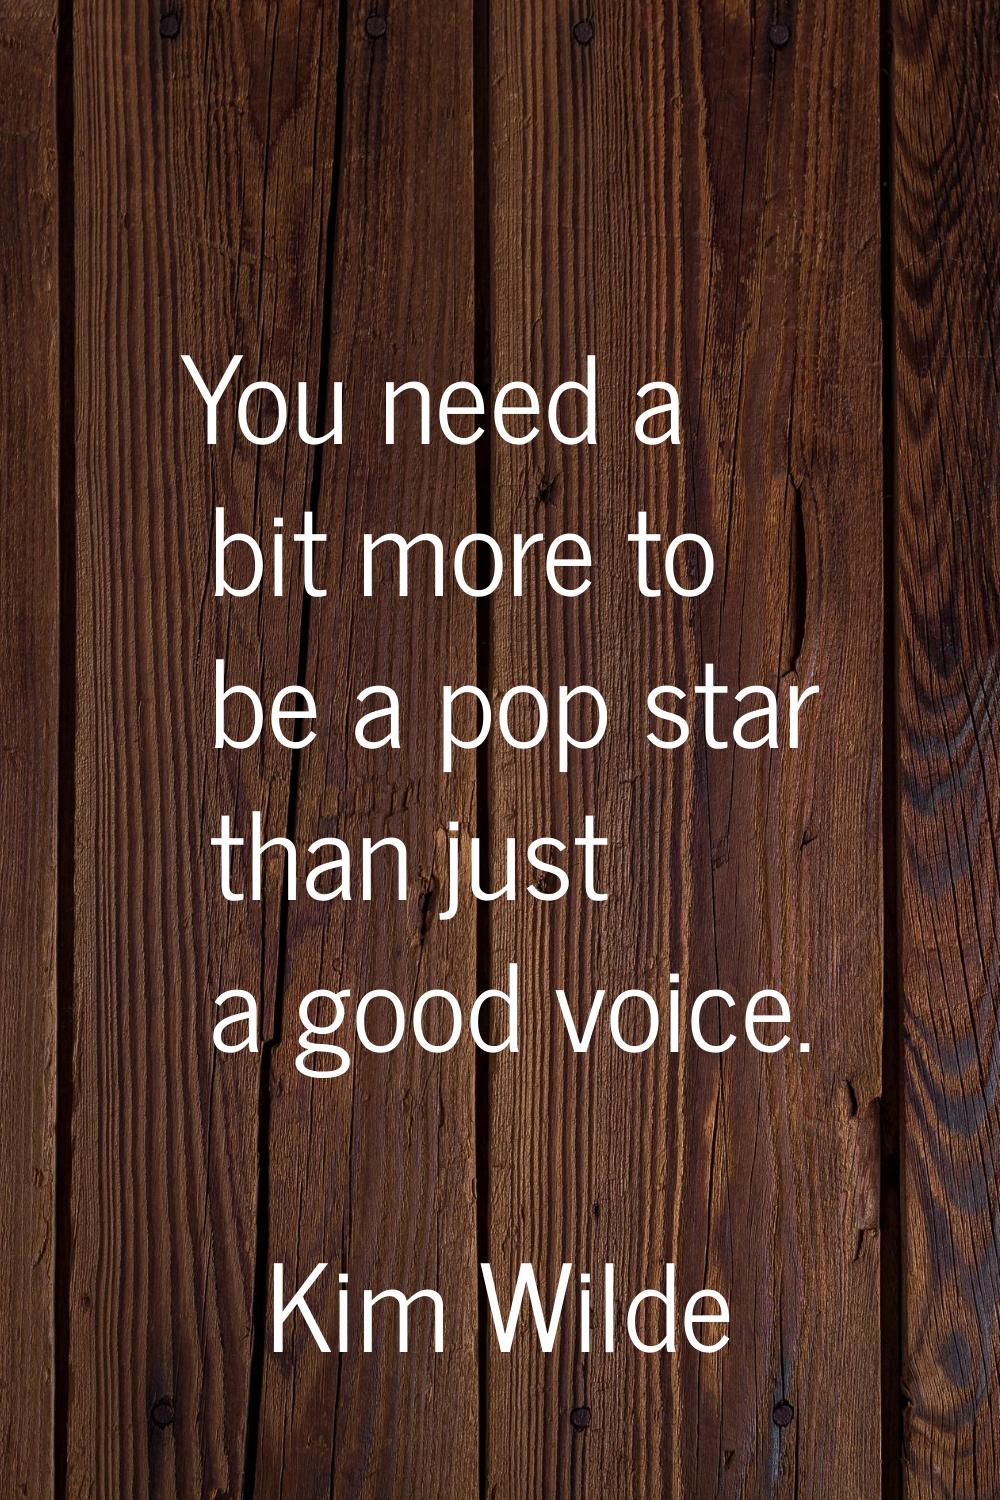 You need a bit more to be a pop star than just a good voice.